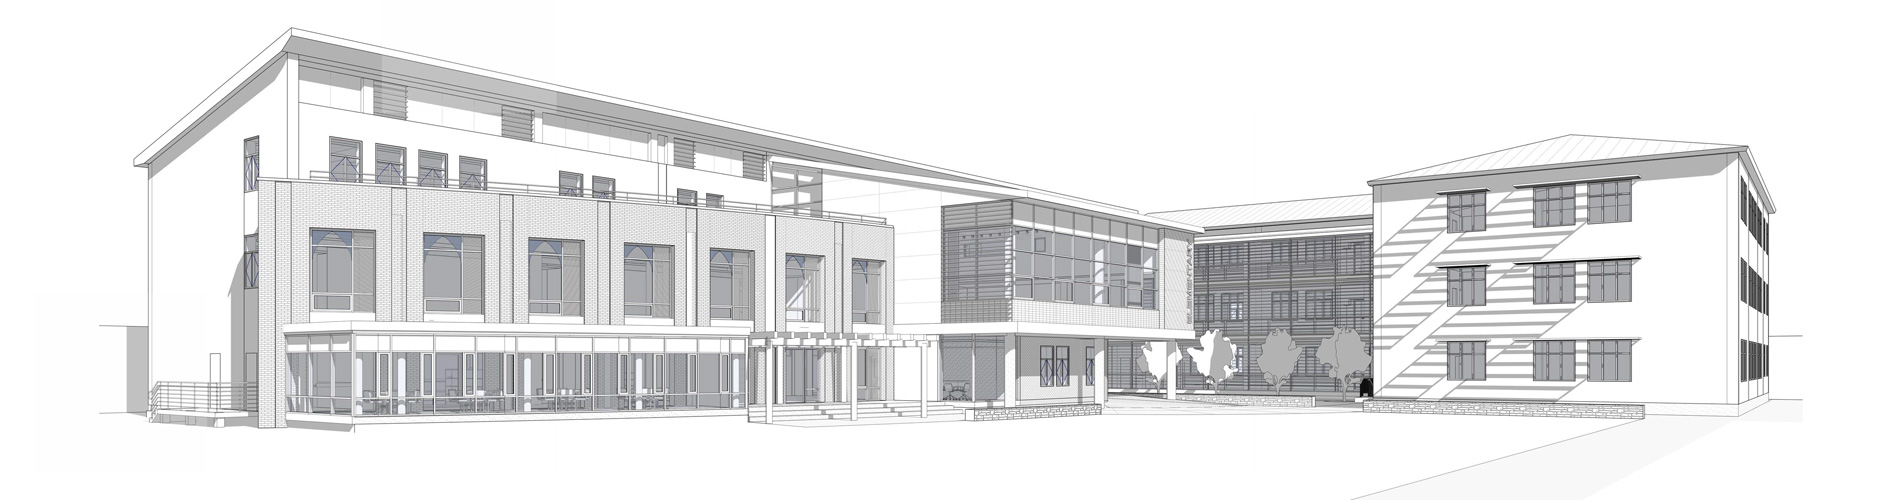 Drawing of Elementary School addition